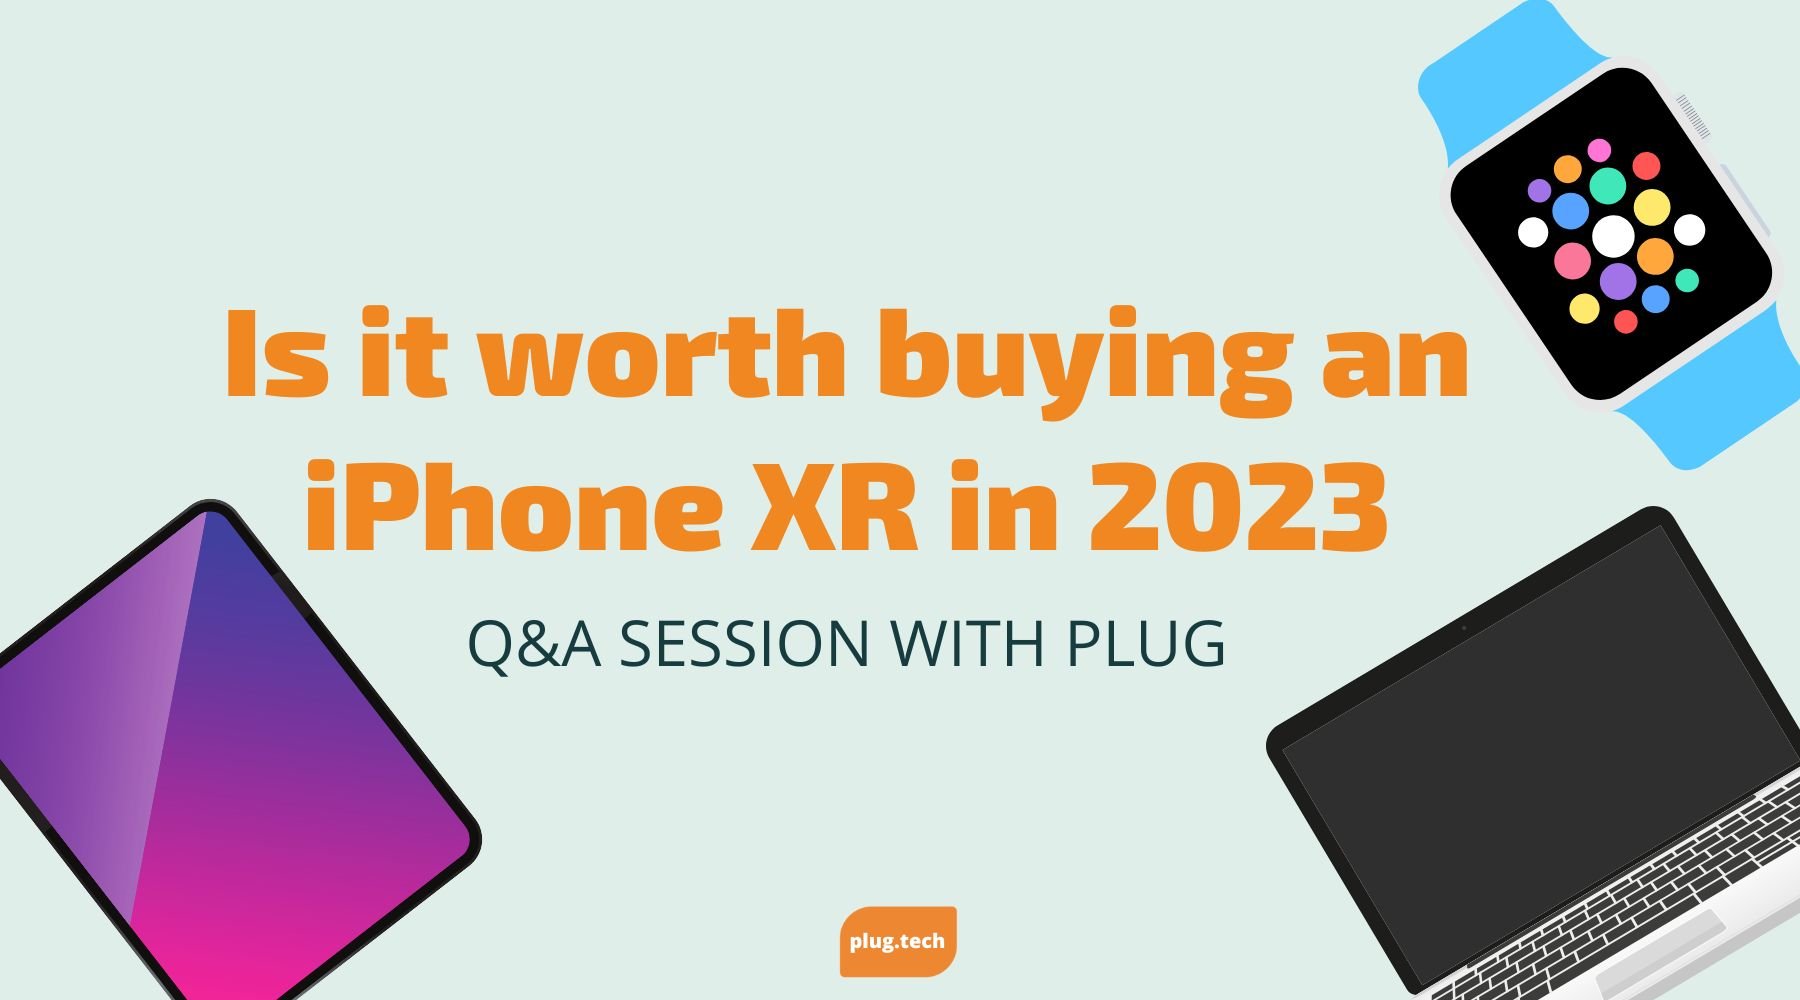 Is it worth buying an iPhone XR in 2023?